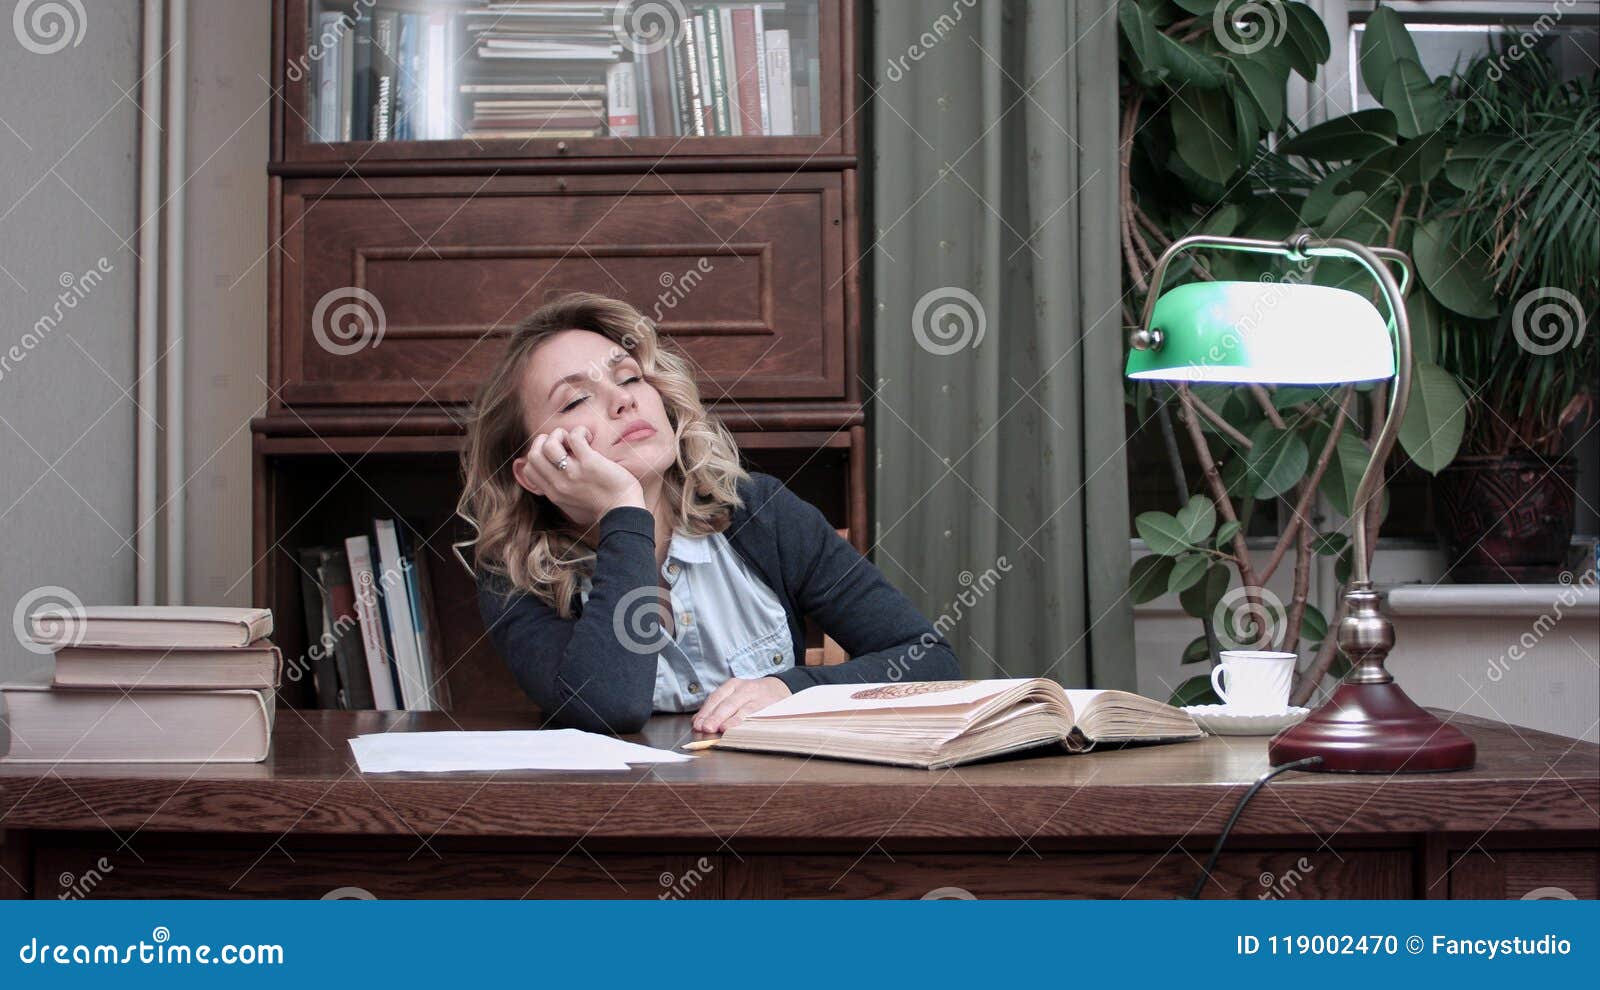 Tired Young Woman Falling Asleep Over A Book While Sitting At The